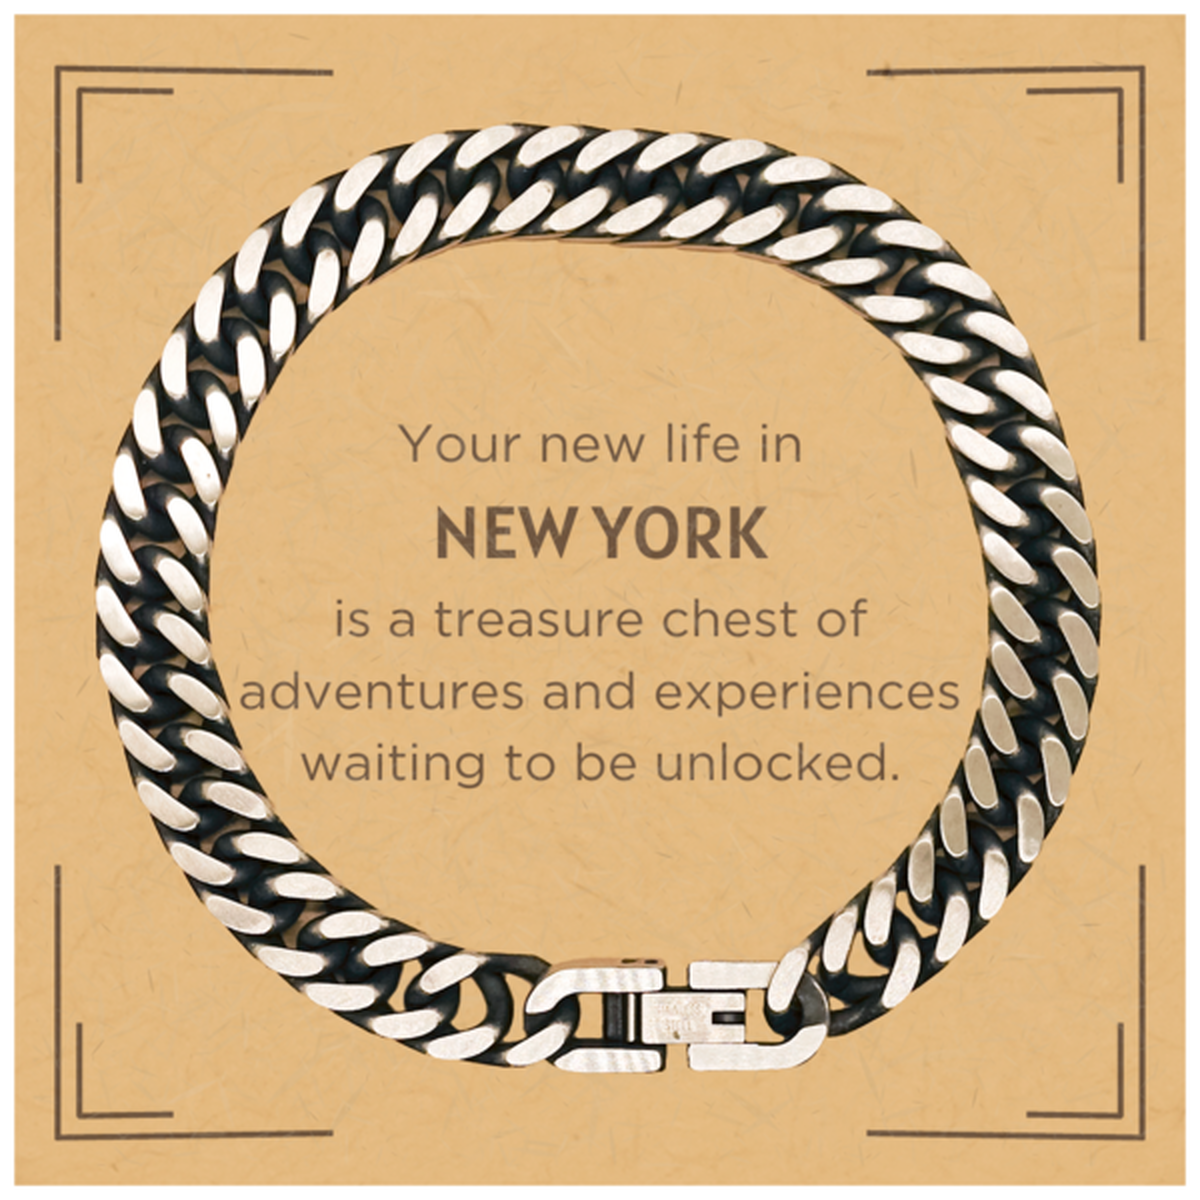 Moving to New York Gifts, Your new life in New York, Long Distance New York Christmas Cuban Link Chain Bracelet For Men, Women, Friends, Coworkers